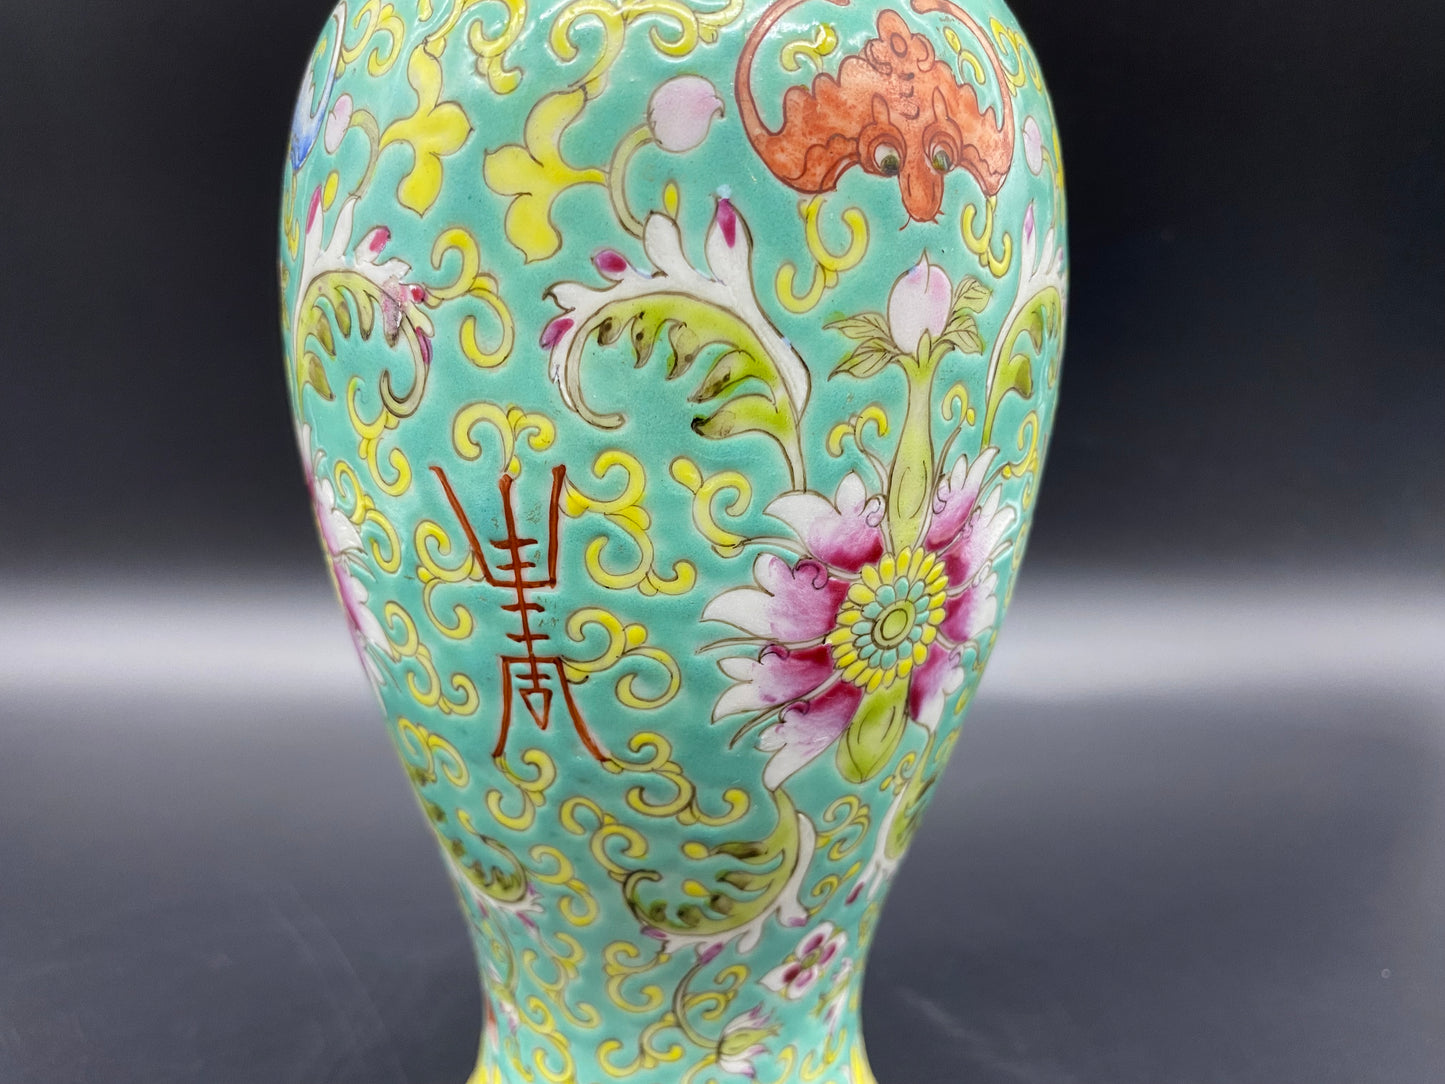 KB Antiques Online - A Really Nice Antique Chinese 19th Century Guangux Famille June Porcelain Vase